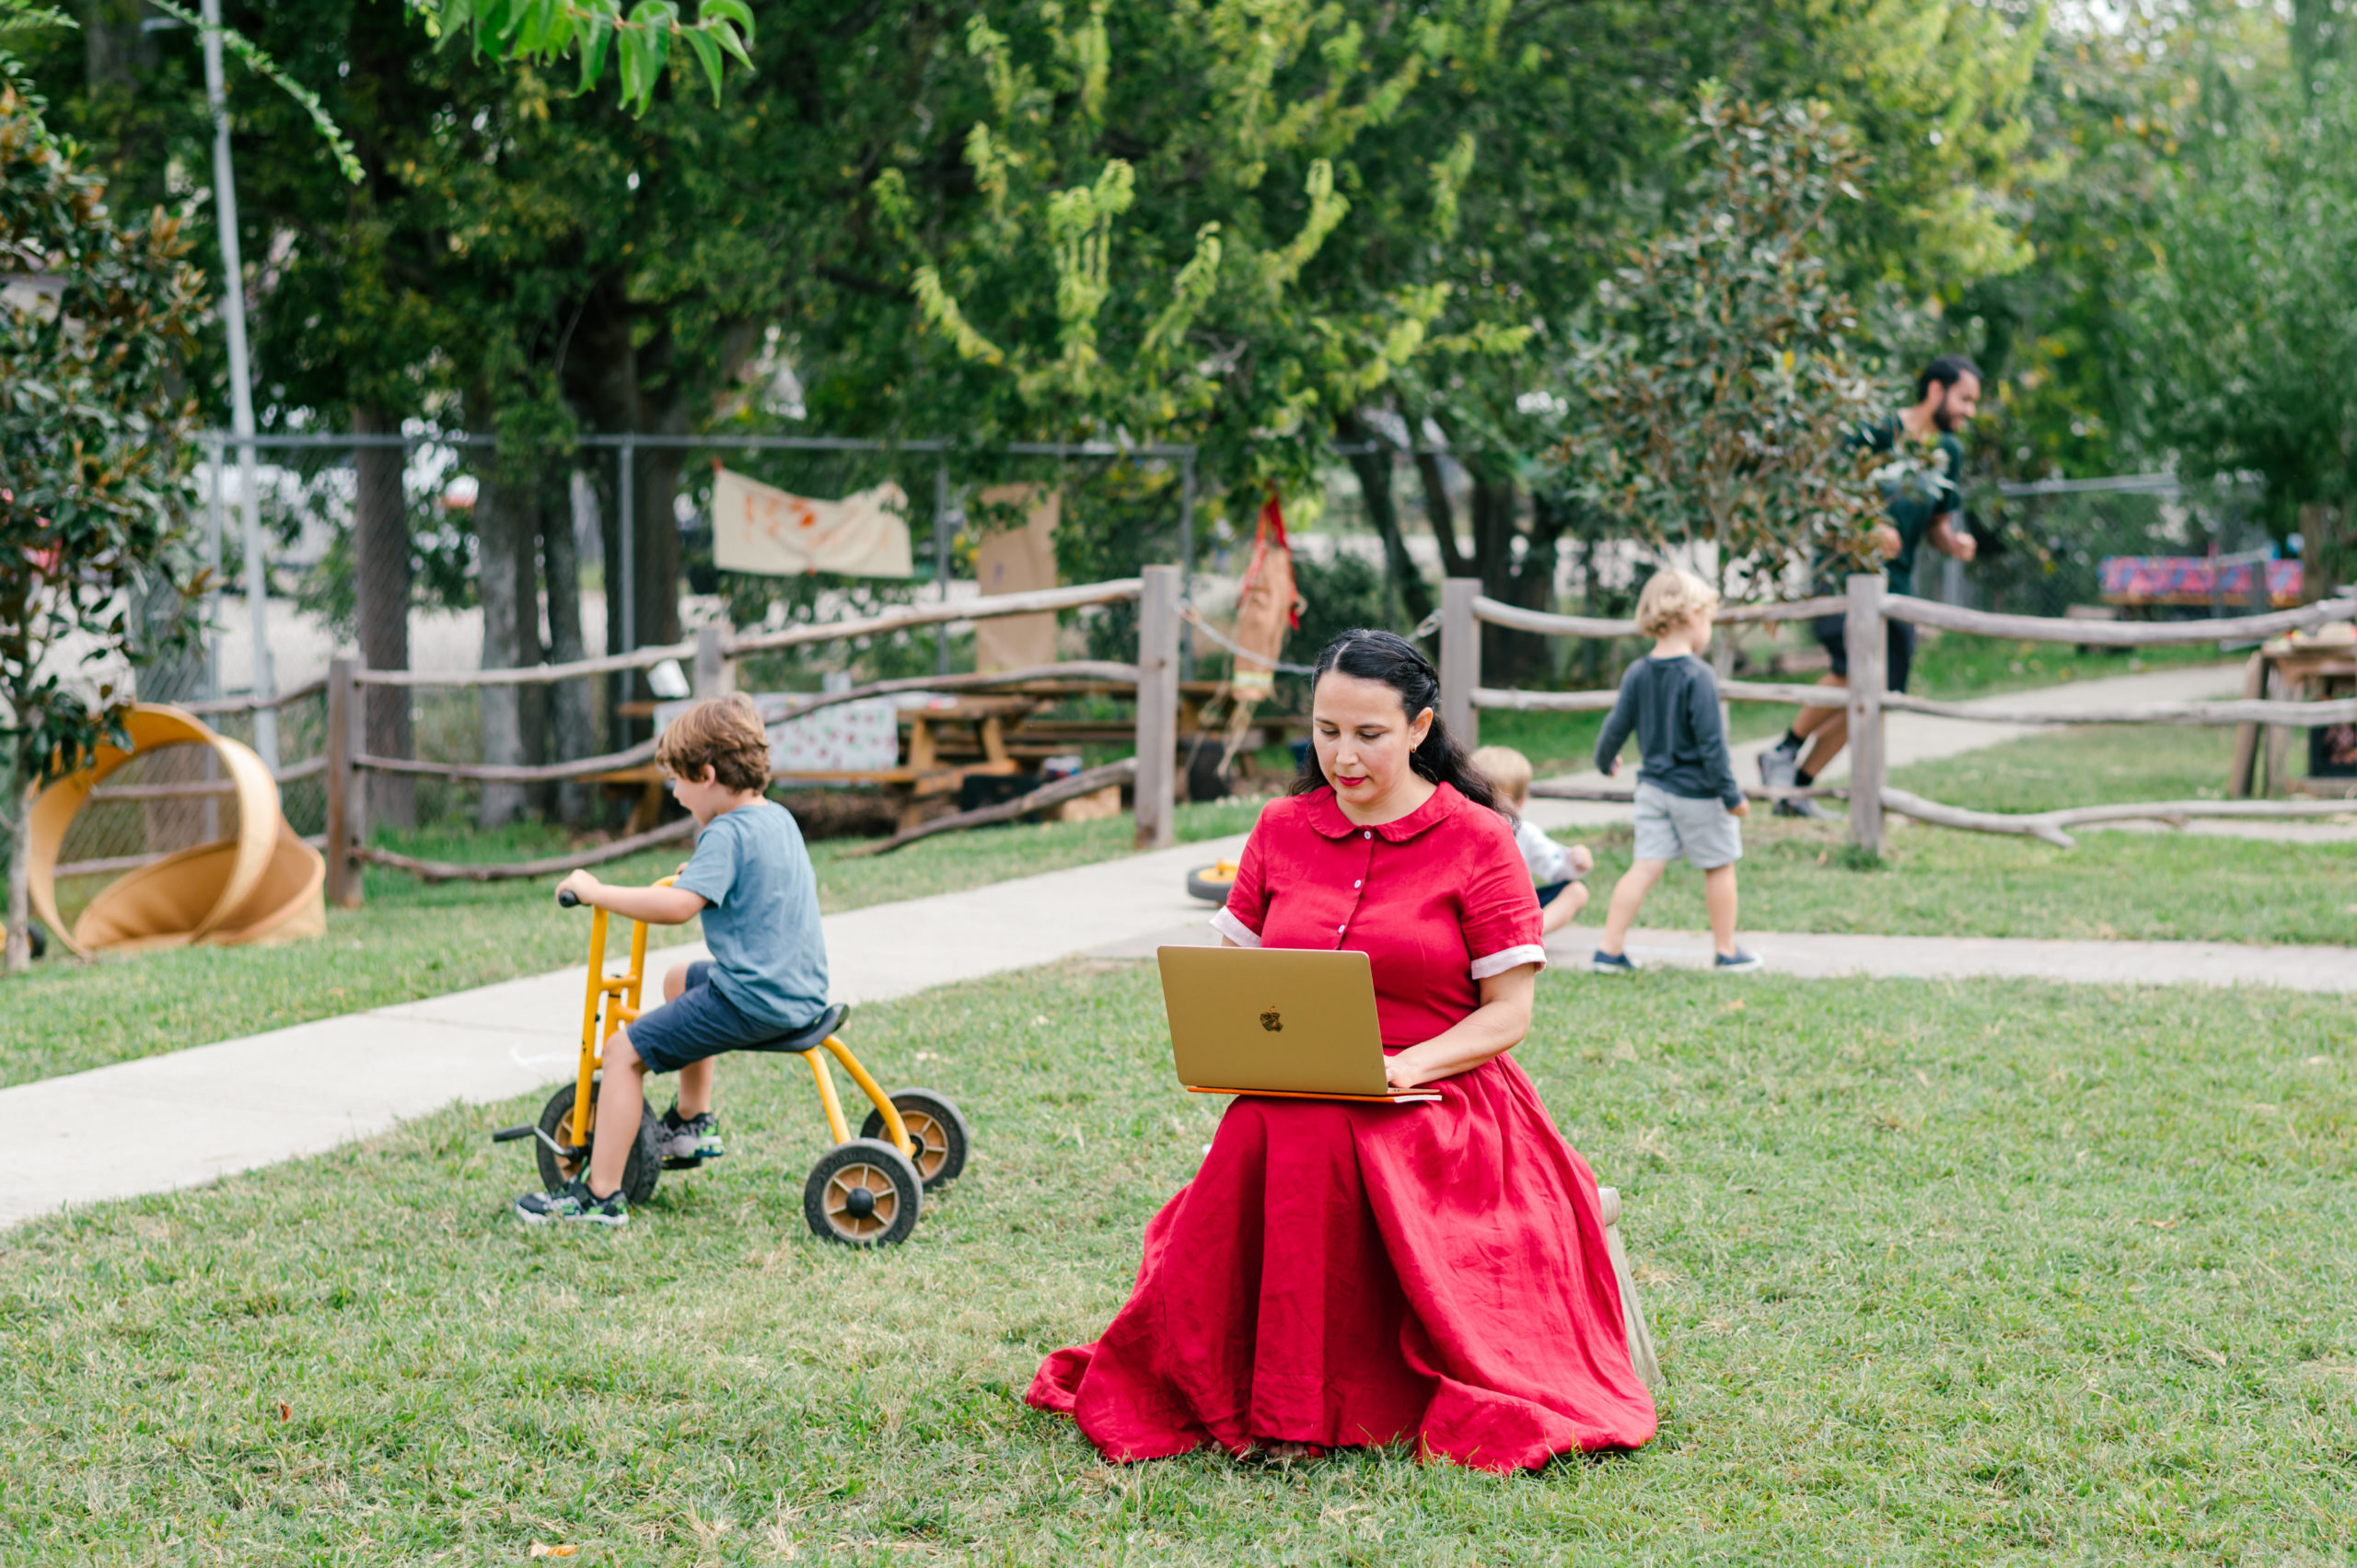 Photo of woman child development coach in a beautiful red dress observing kids on the playground while taking notes on her computer  during her branding photography session
